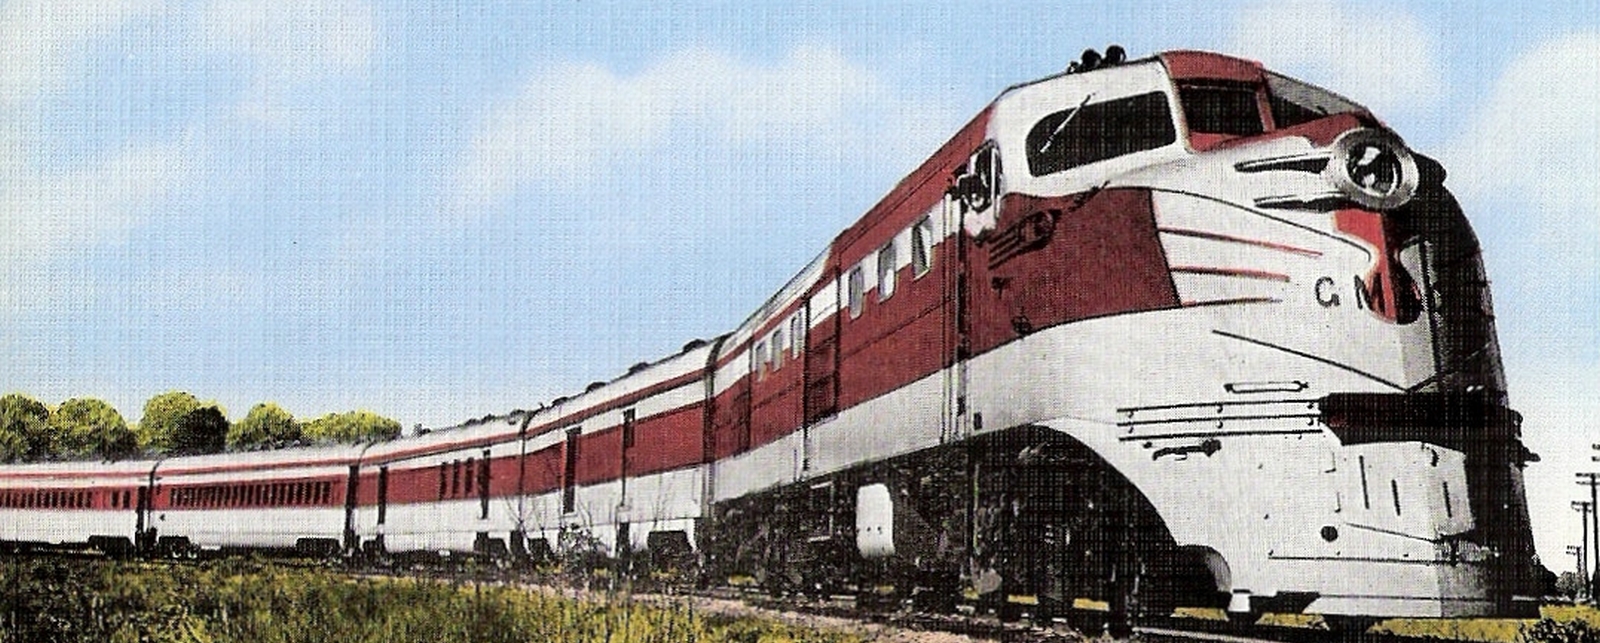 Gulf, Mobile & Ohio Railroad DL-109 with Streamlined Train “The Rebel”, postcard by E.C. crop